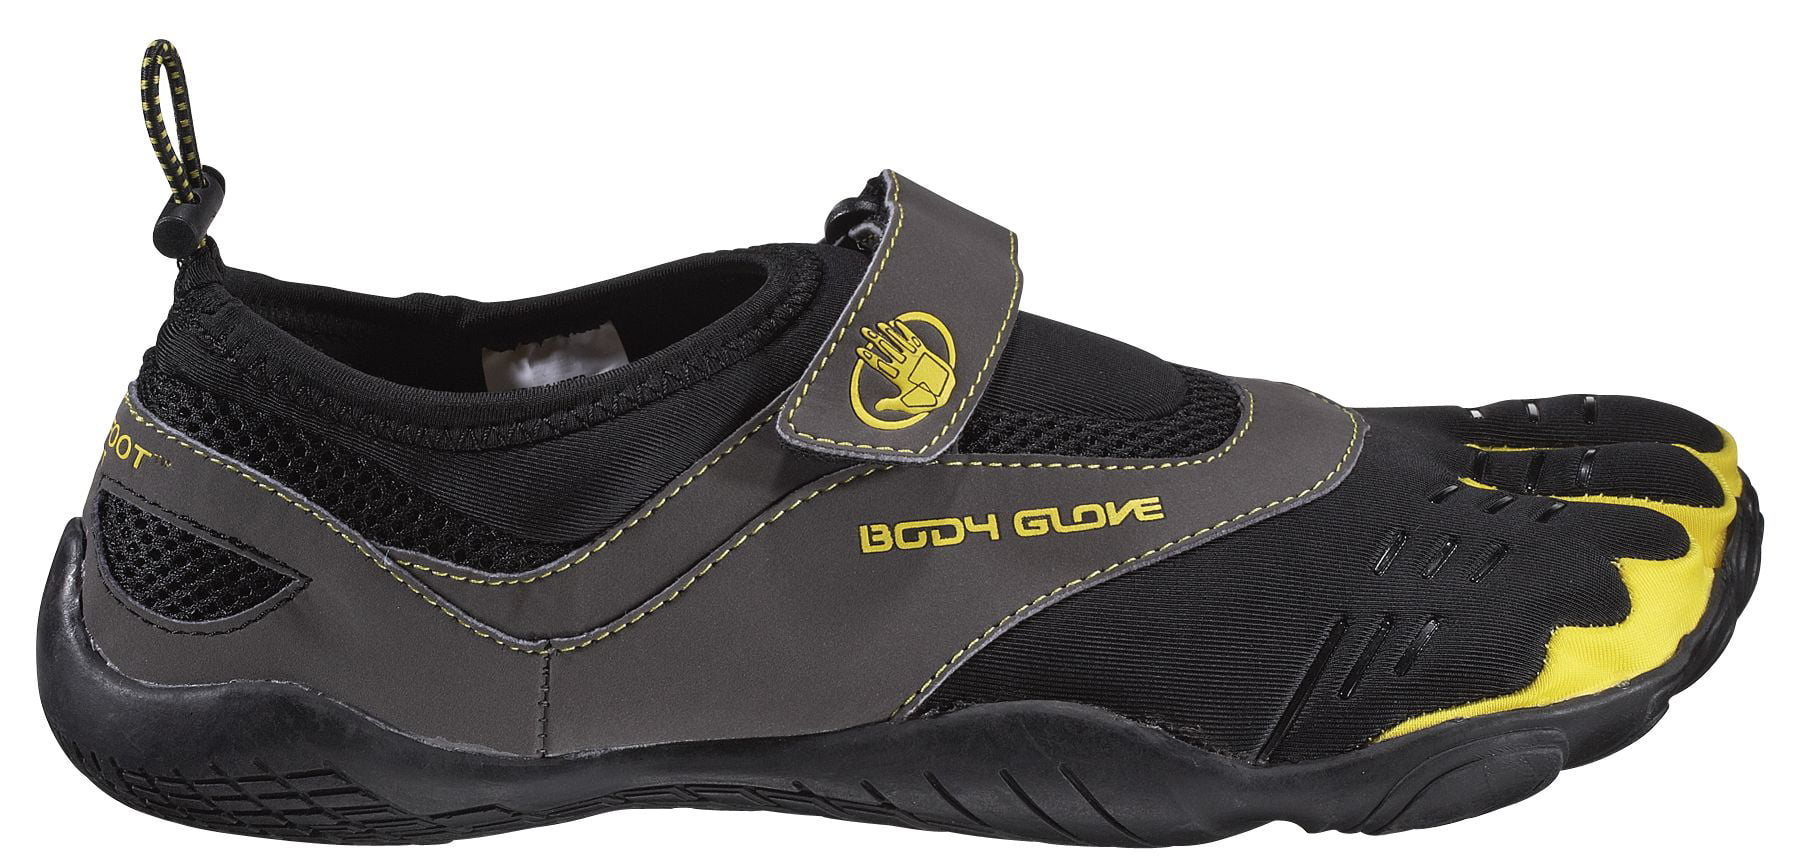 Body Glove Body Glove Men's 3T Barefoot Max Water Shoes